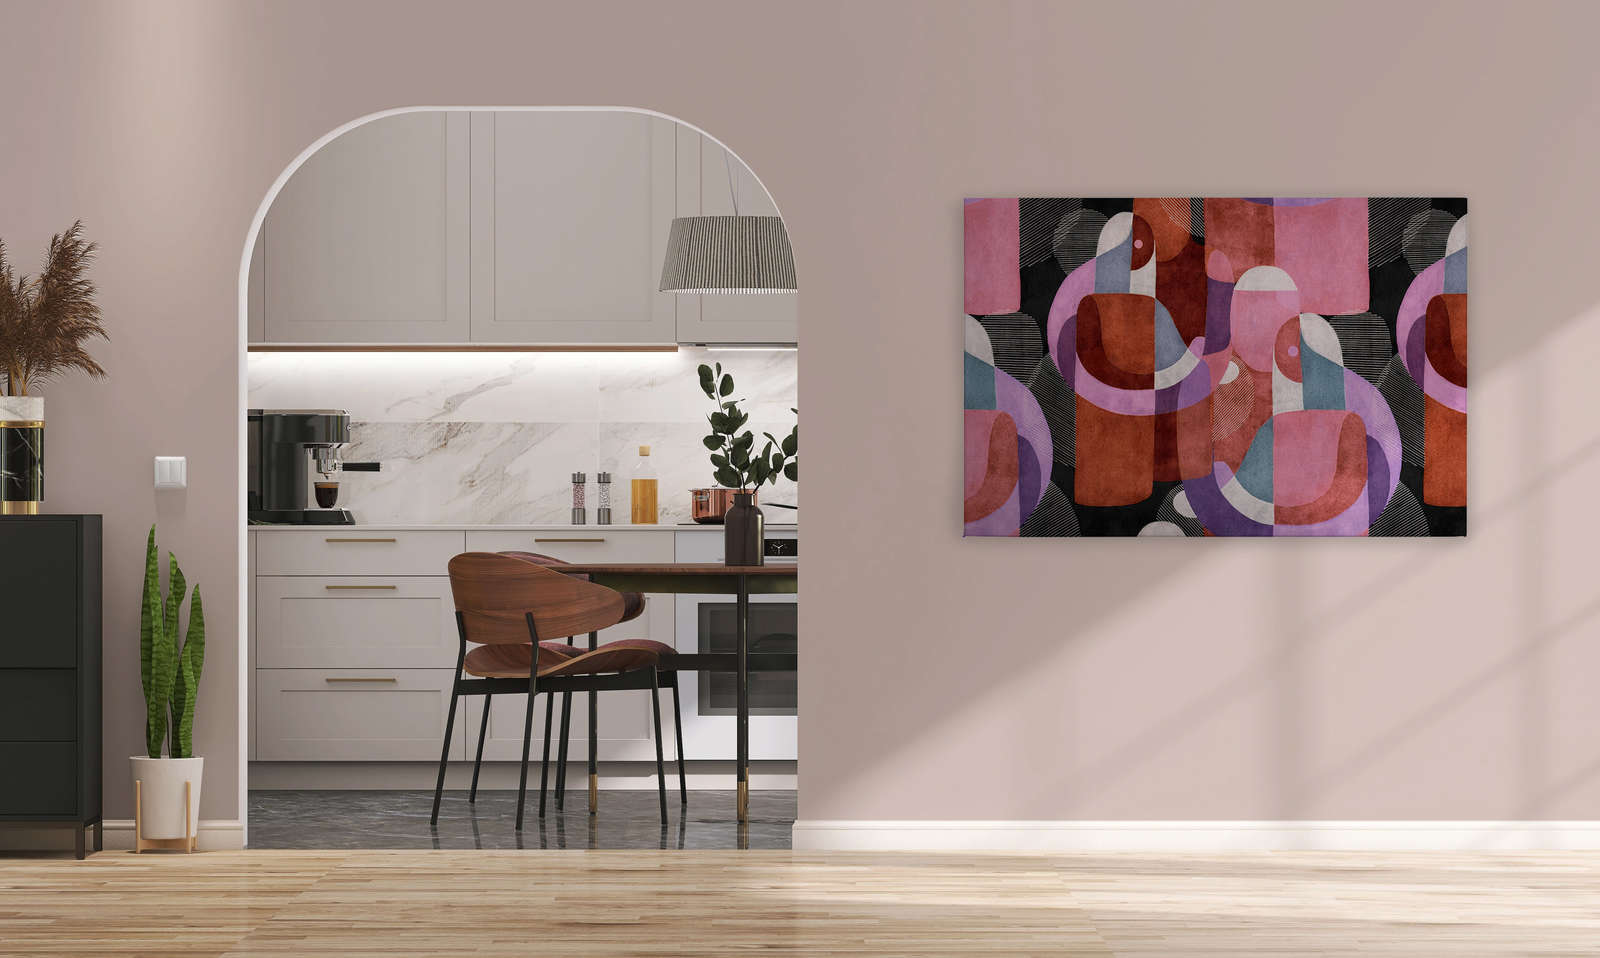             Meeting Place 2 - Canvas painting abstract ethno design in black & pink - 1,20 m x 0,80 m
        